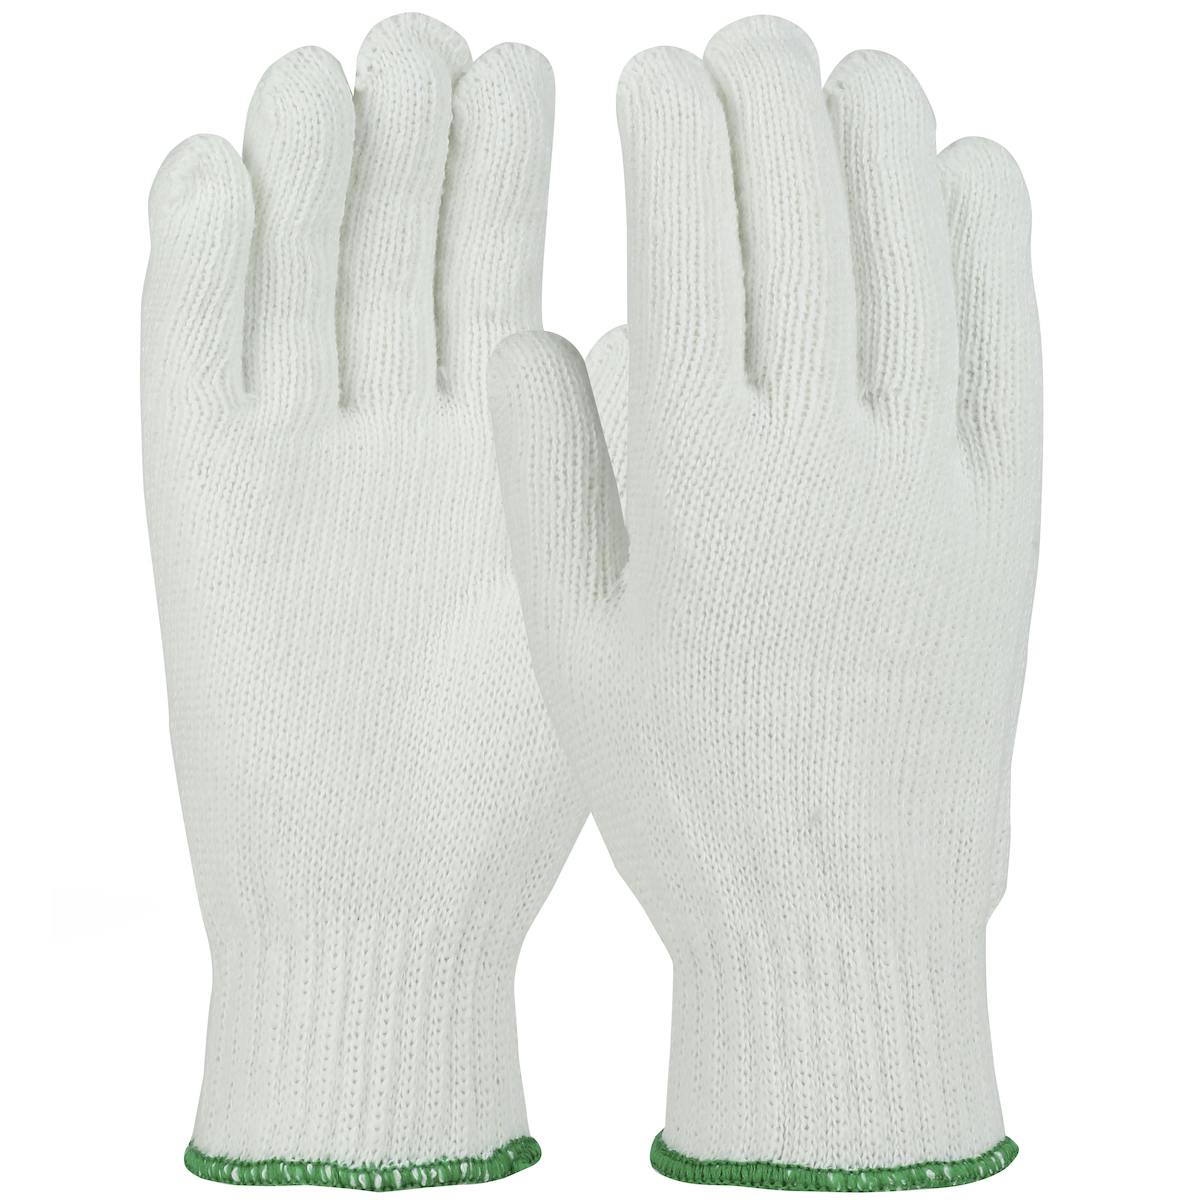 PIP® Seamless Knit Cotton and Polyester Glove - Heavy Weight (MP25)